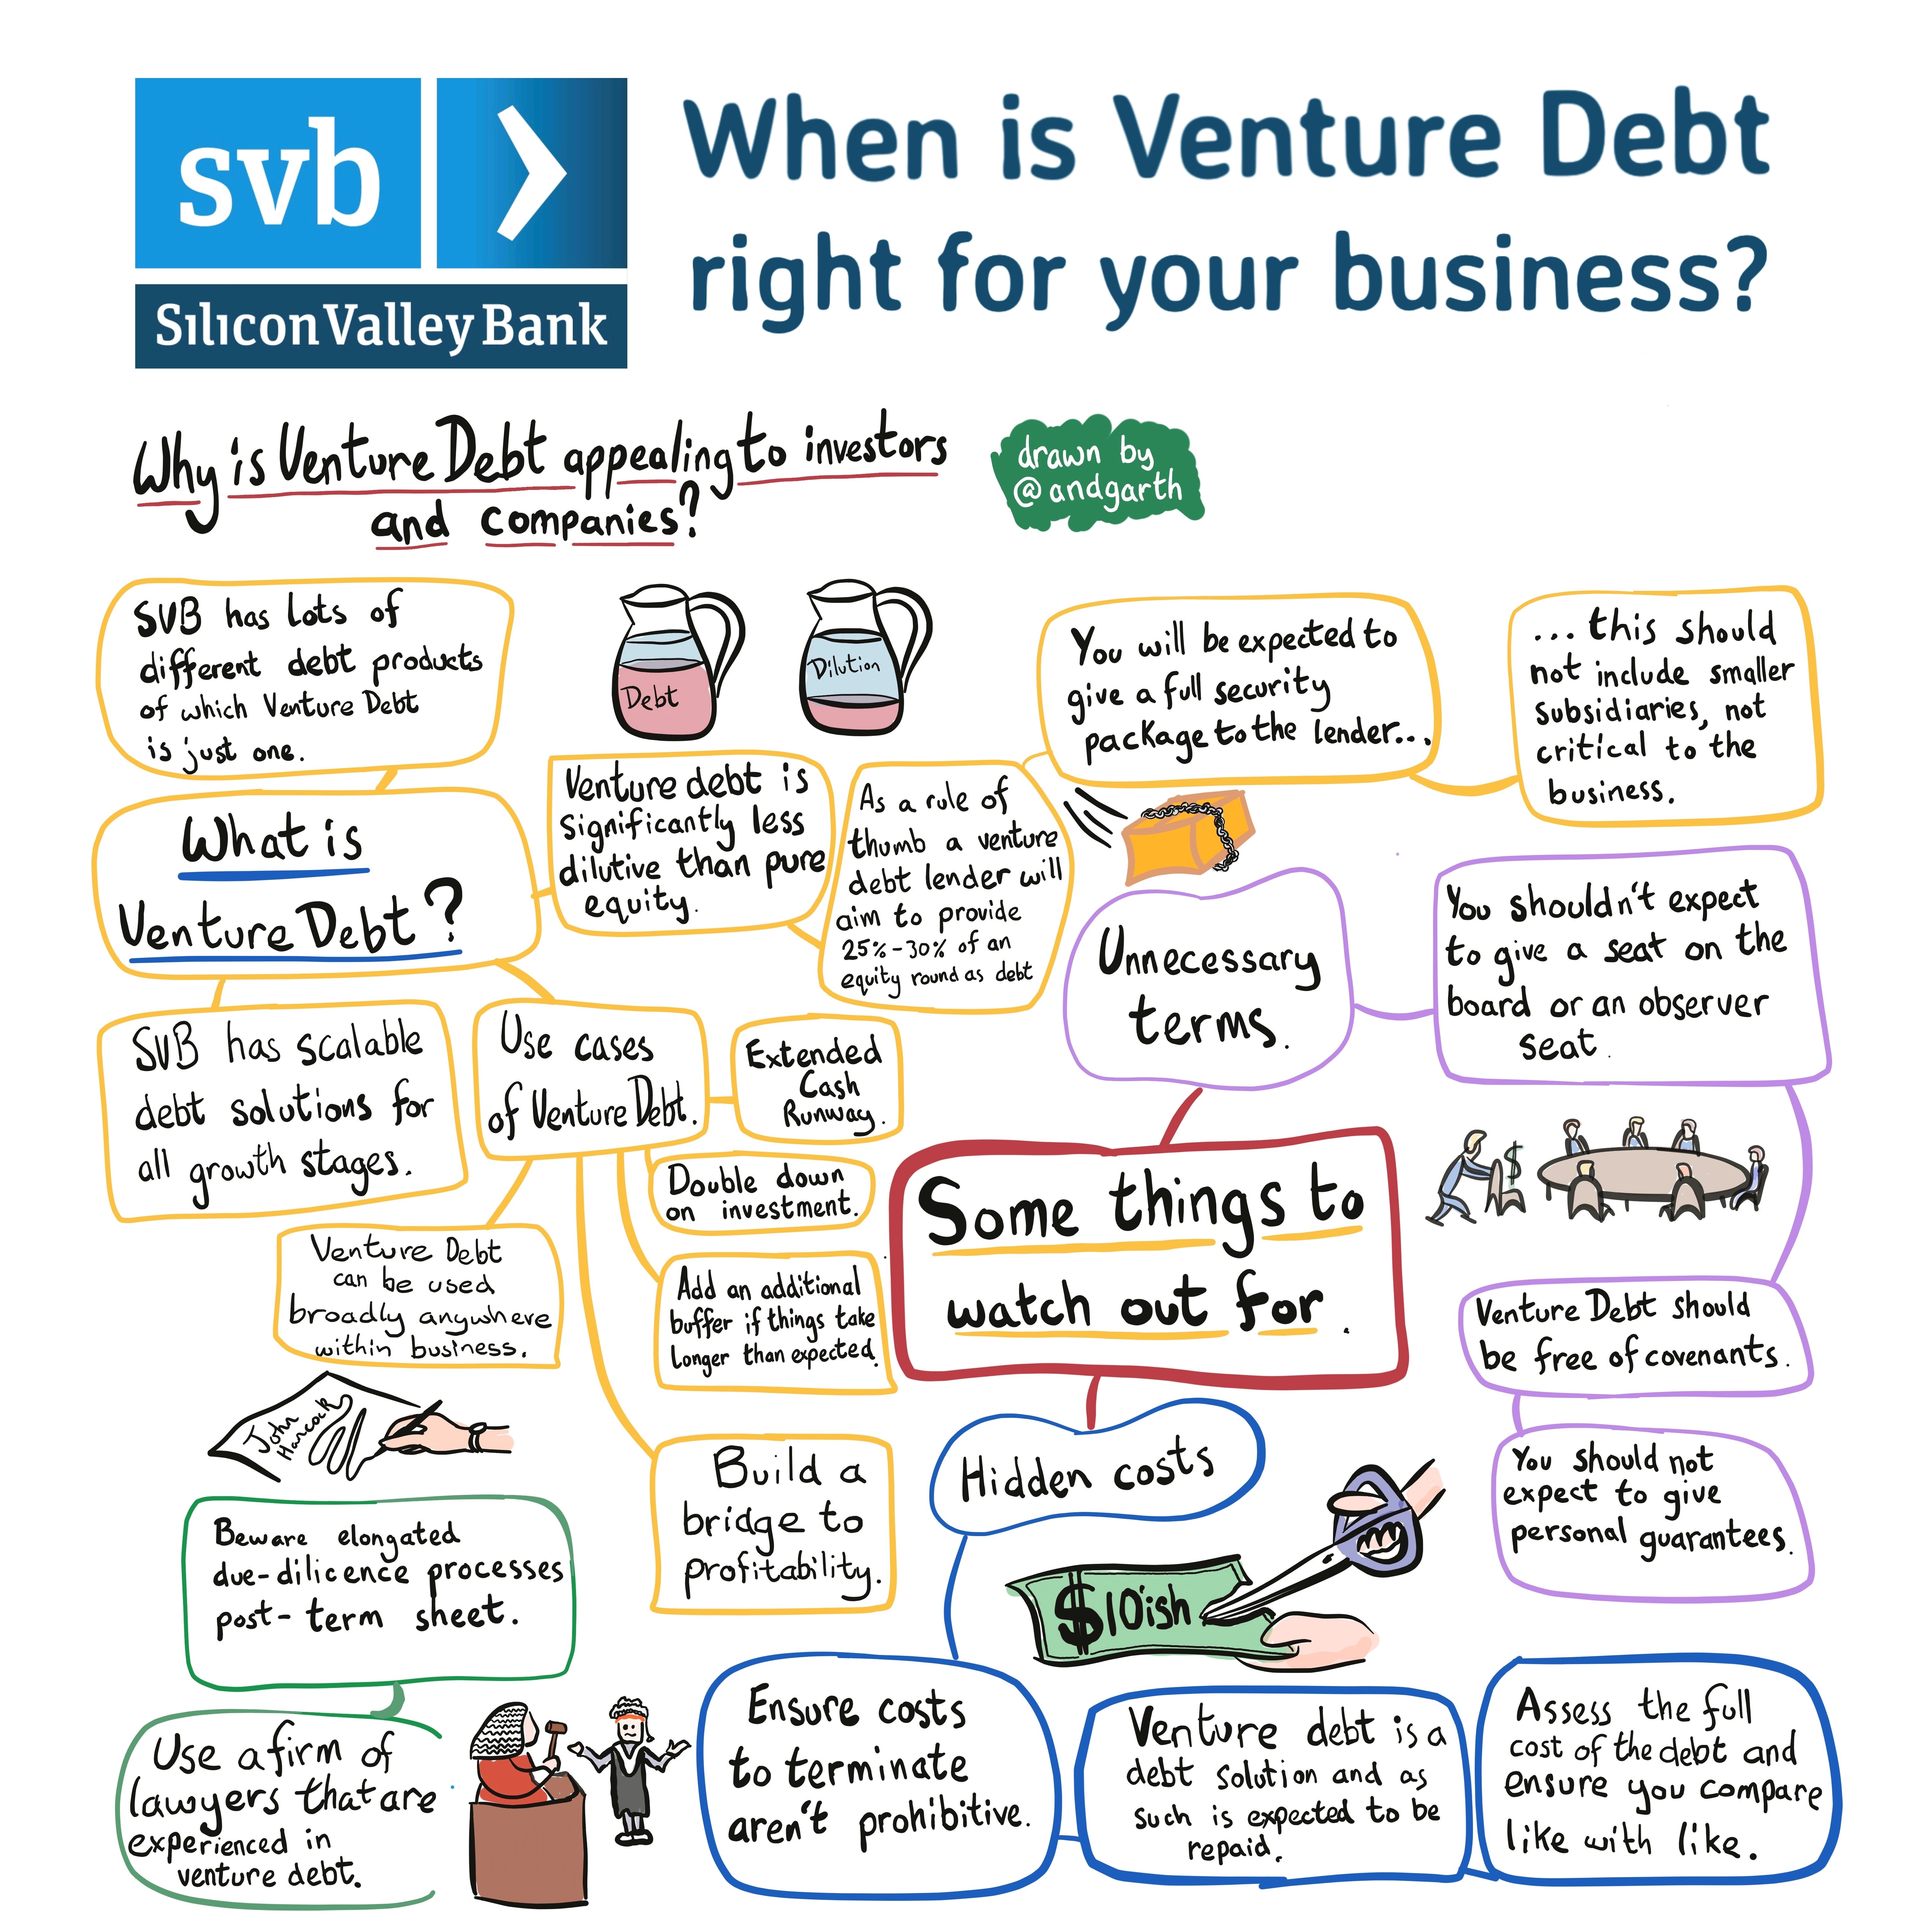 When are venture debt payments due?